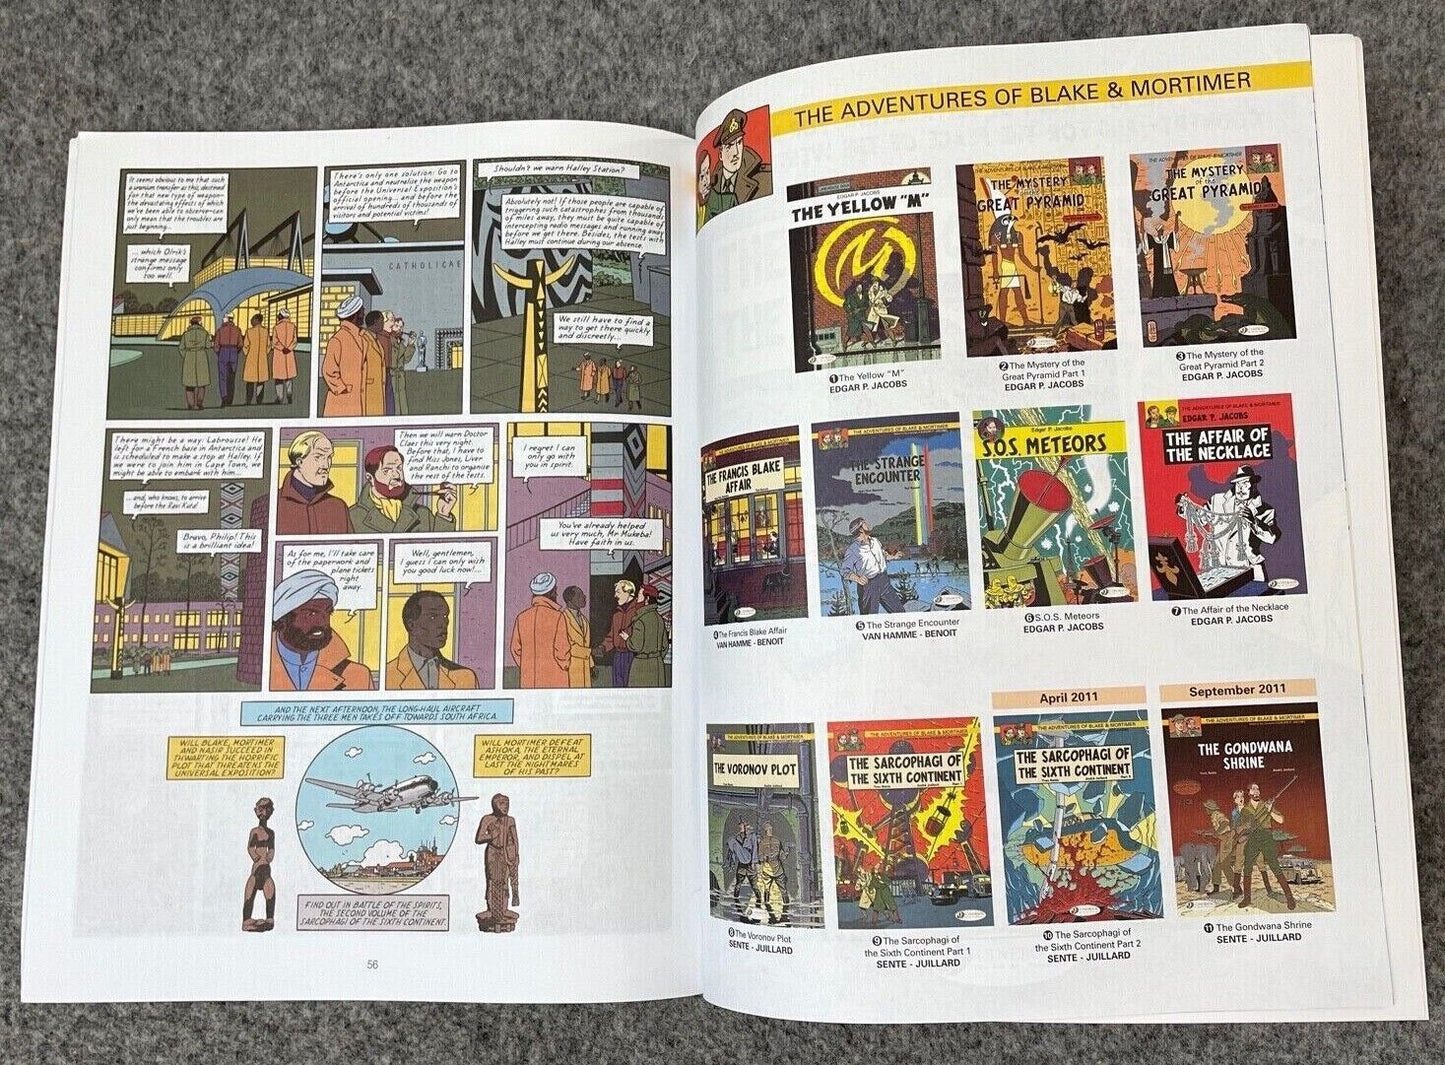 Sarcophagi of the 6th Continent Part 1 - Blake & Mortimer Comic Volume 9 - Cinebook UK Paperback Edition